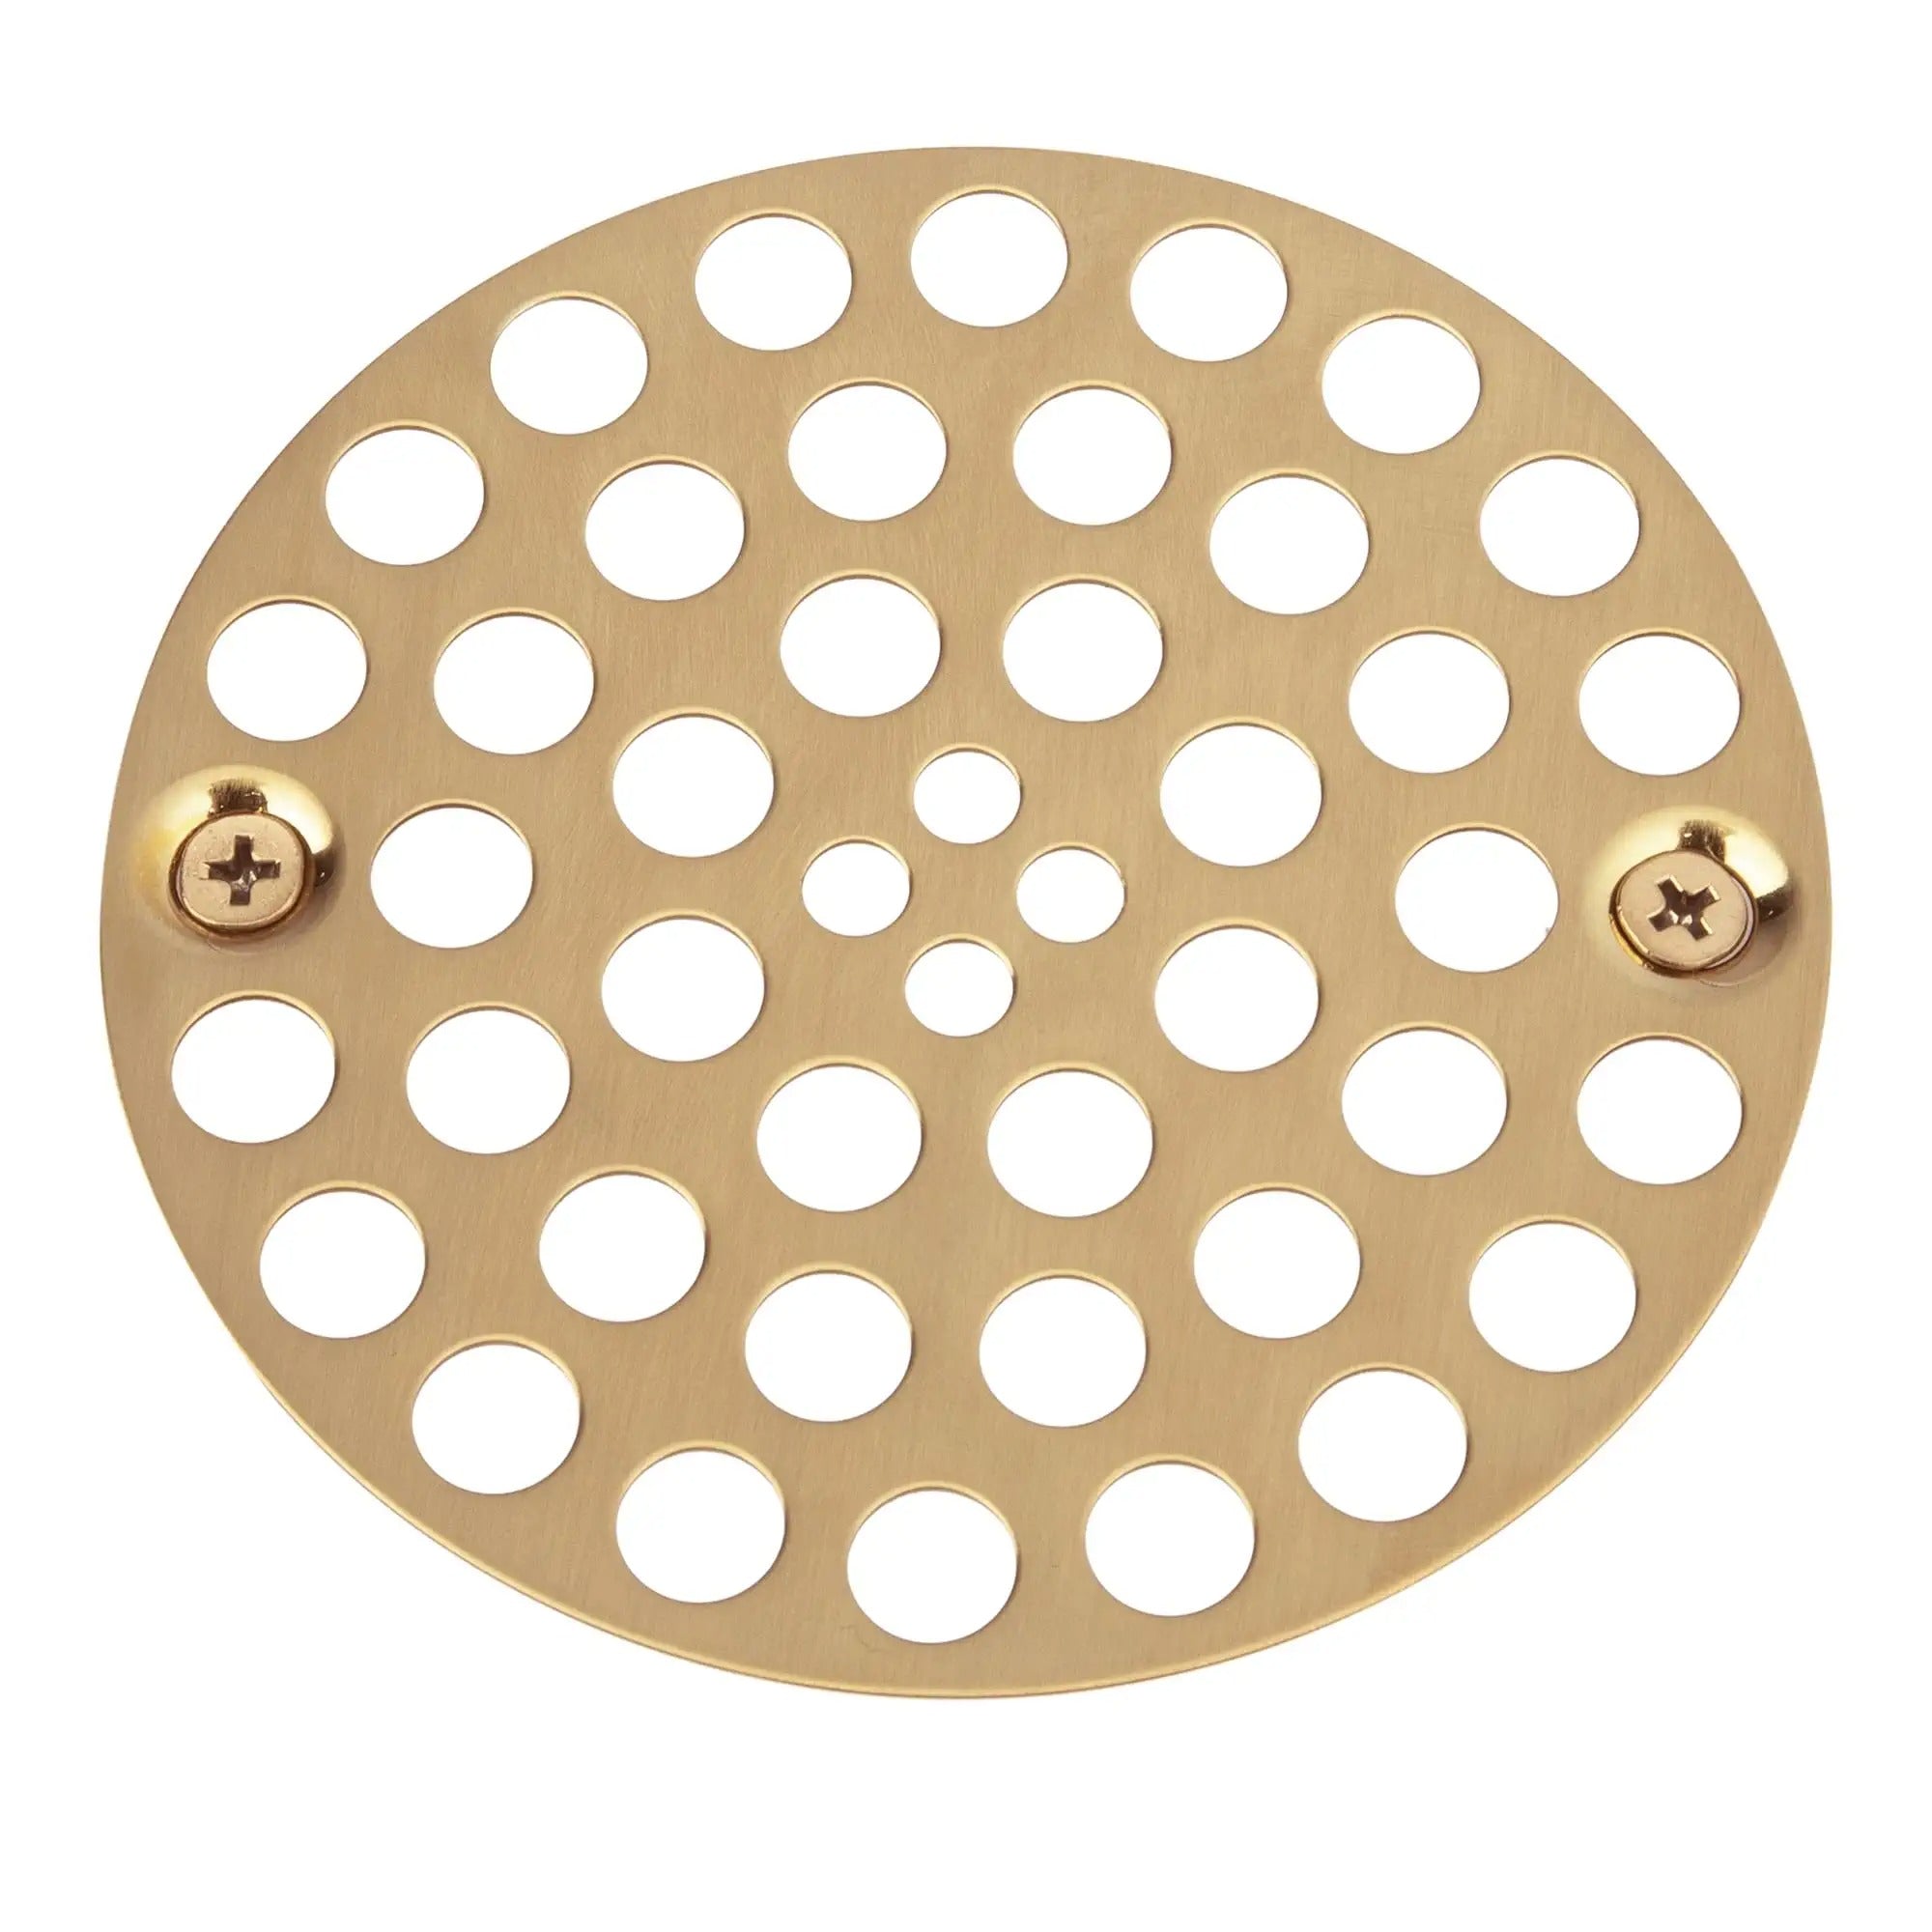 Shower drain cover replacement 